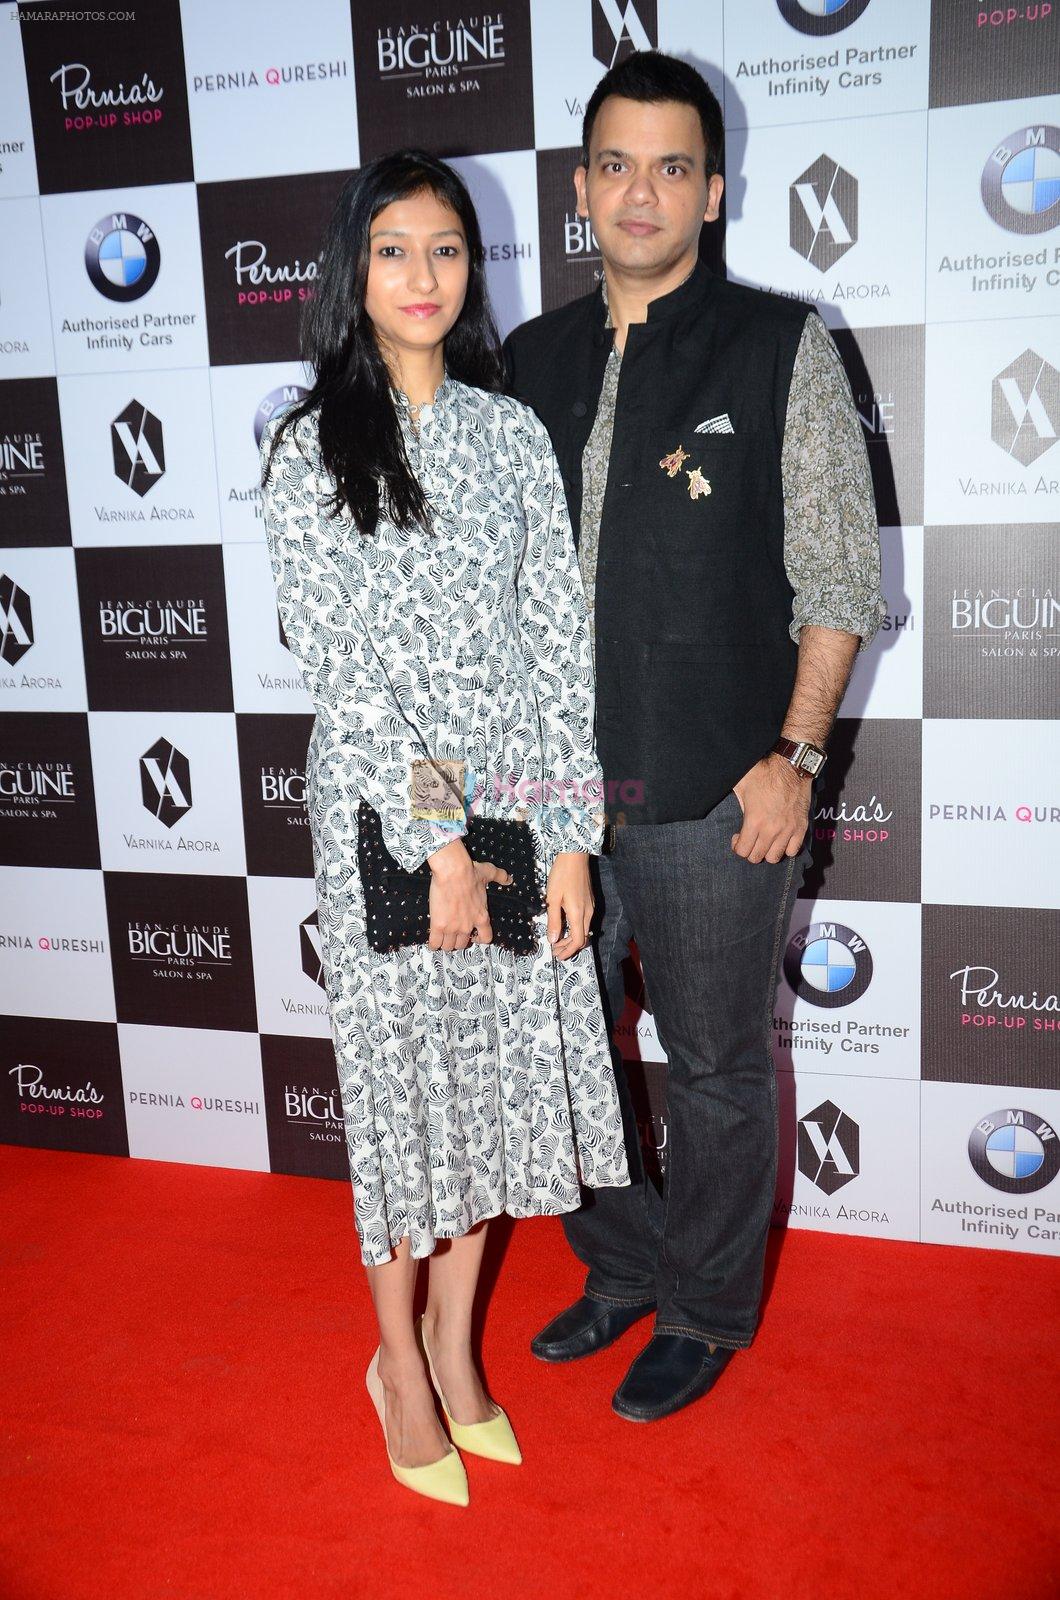 on the red carpet for Pernia Qureshi's show on 9th Jne 2016